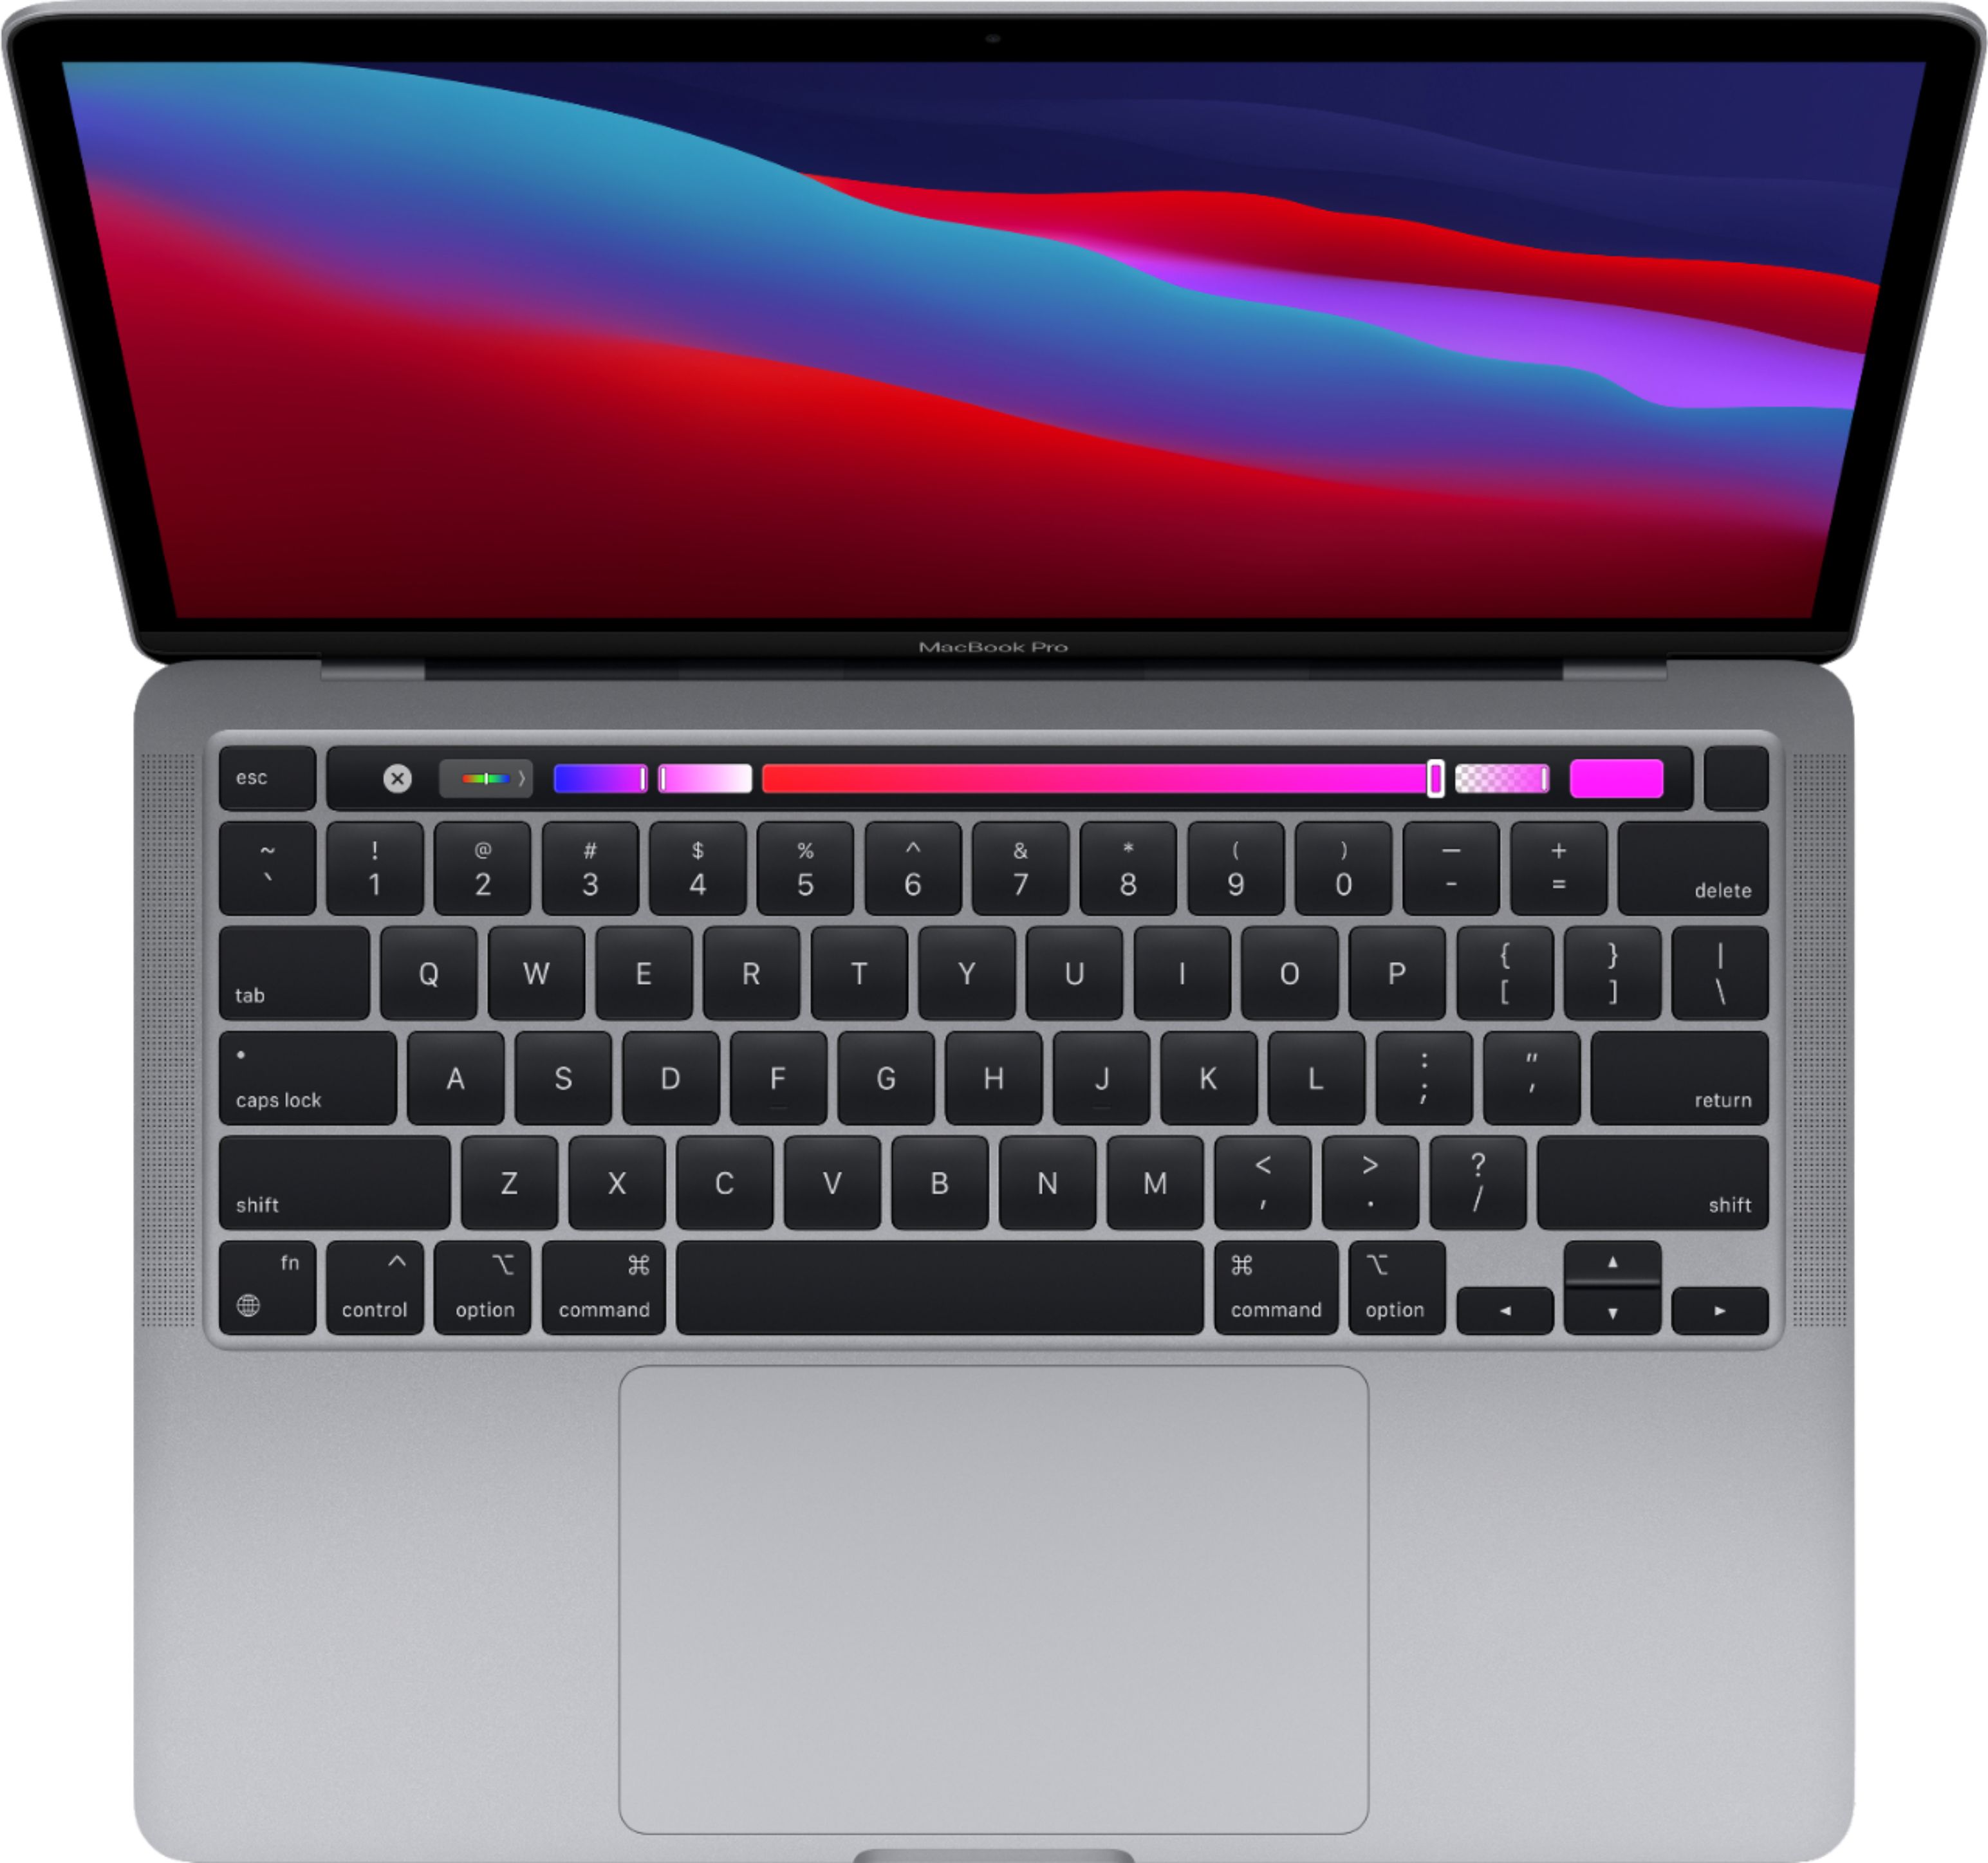 Apple macbook pro models and prices older aunty